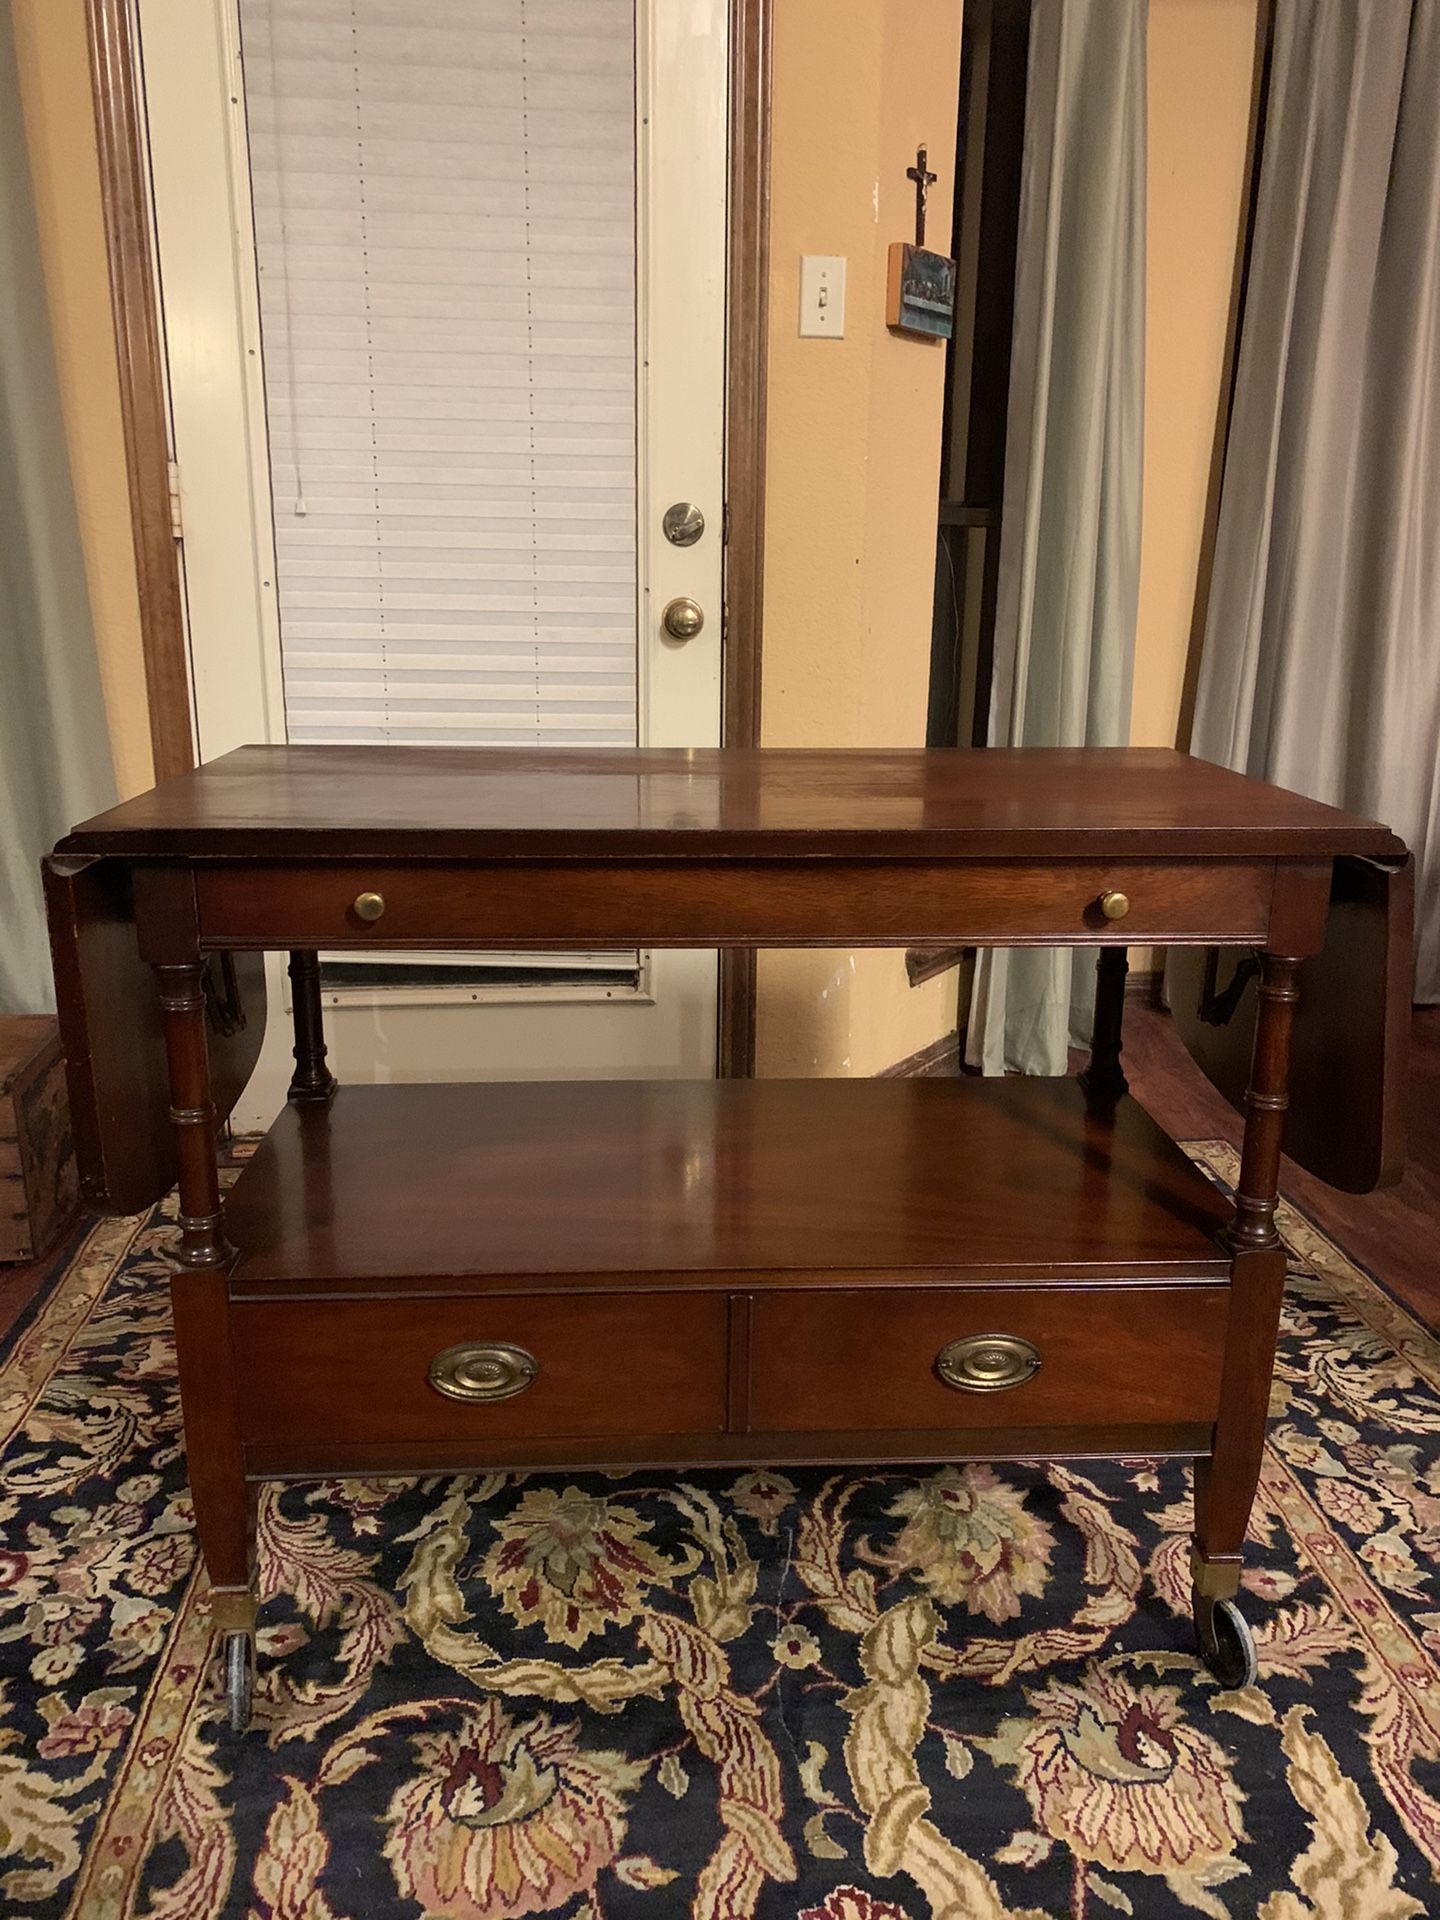 38x19x31 antique vintage all wood rolling drop leaf bar tea cart buffet server side table with 2 long drawers and shelf. Great condition. When the le